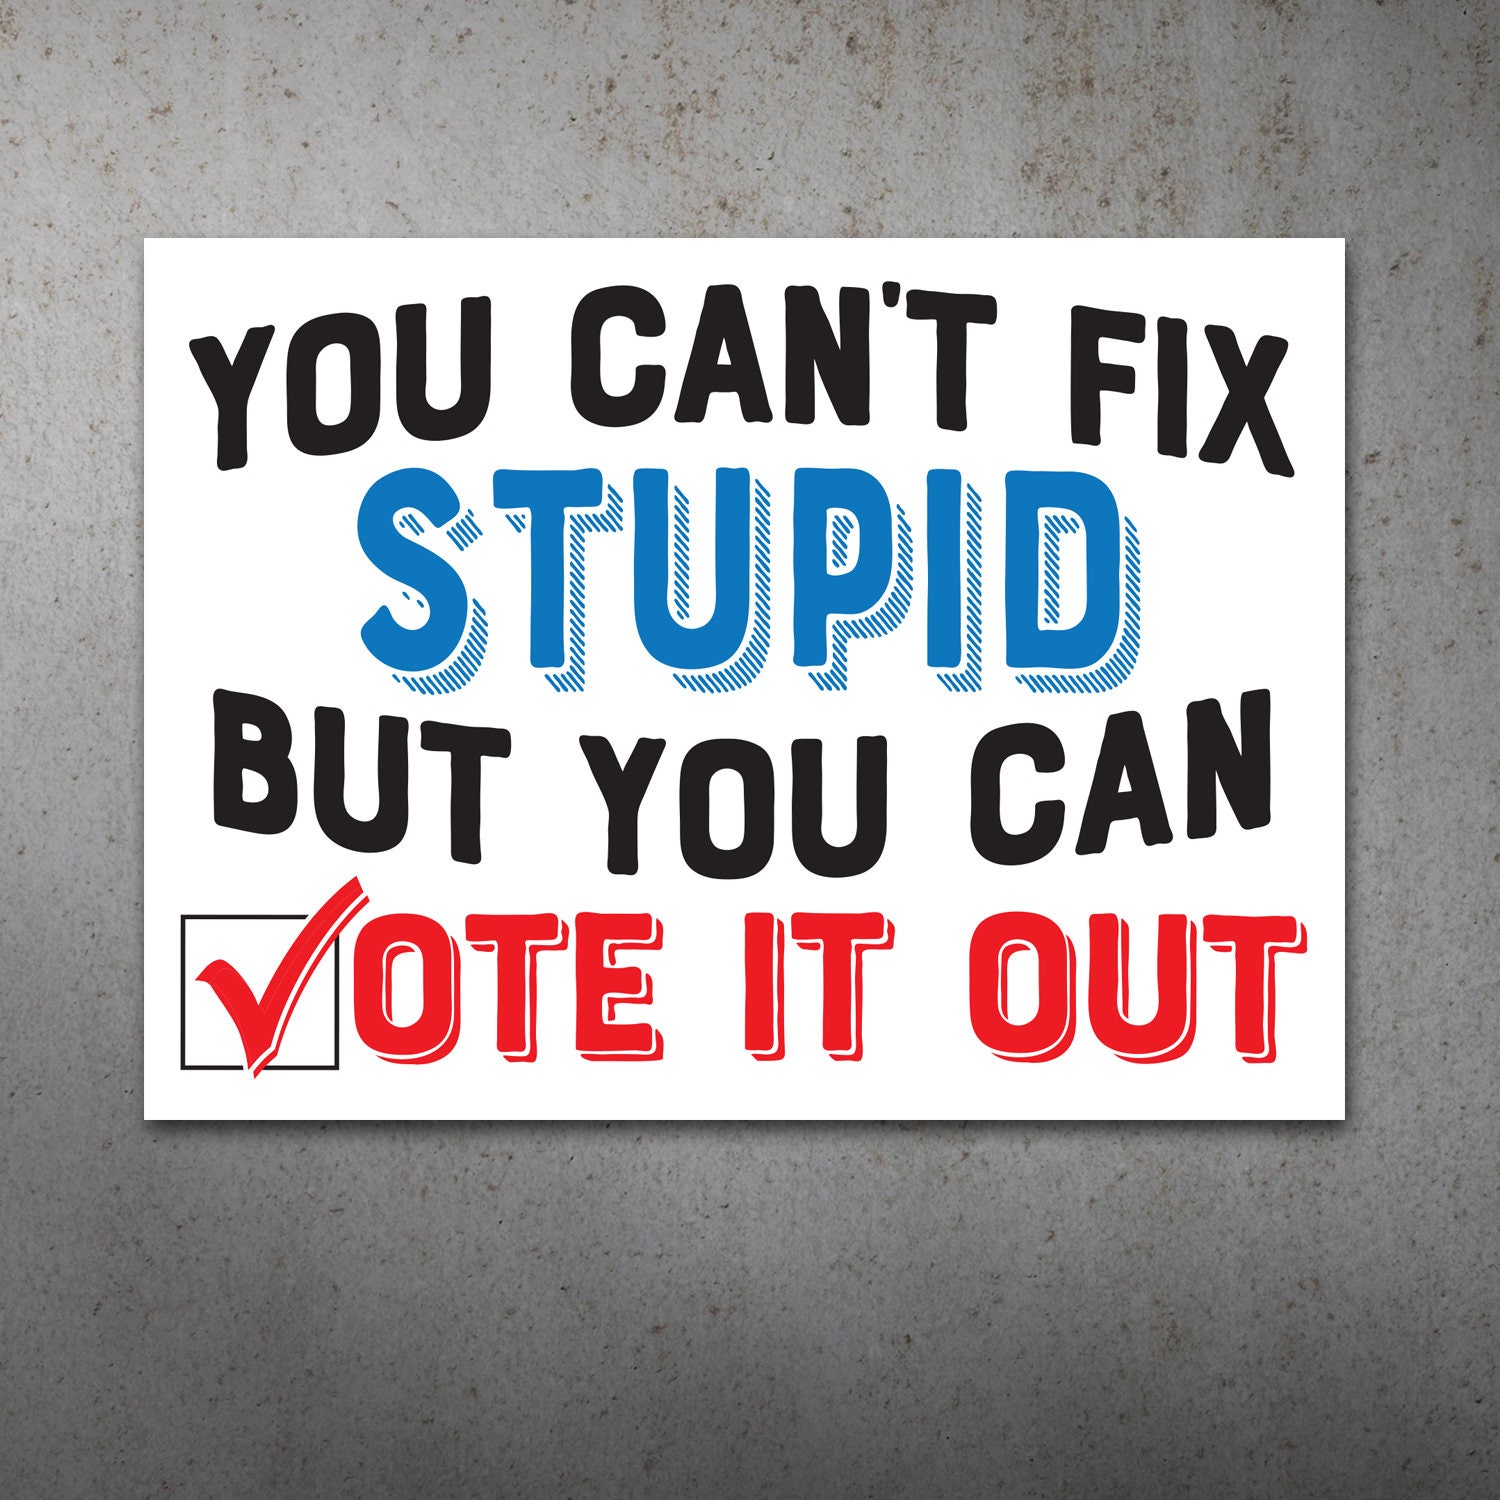 Vote Out Stupid PRINTABLE Protest Poster   Anti Trump Protest Sign